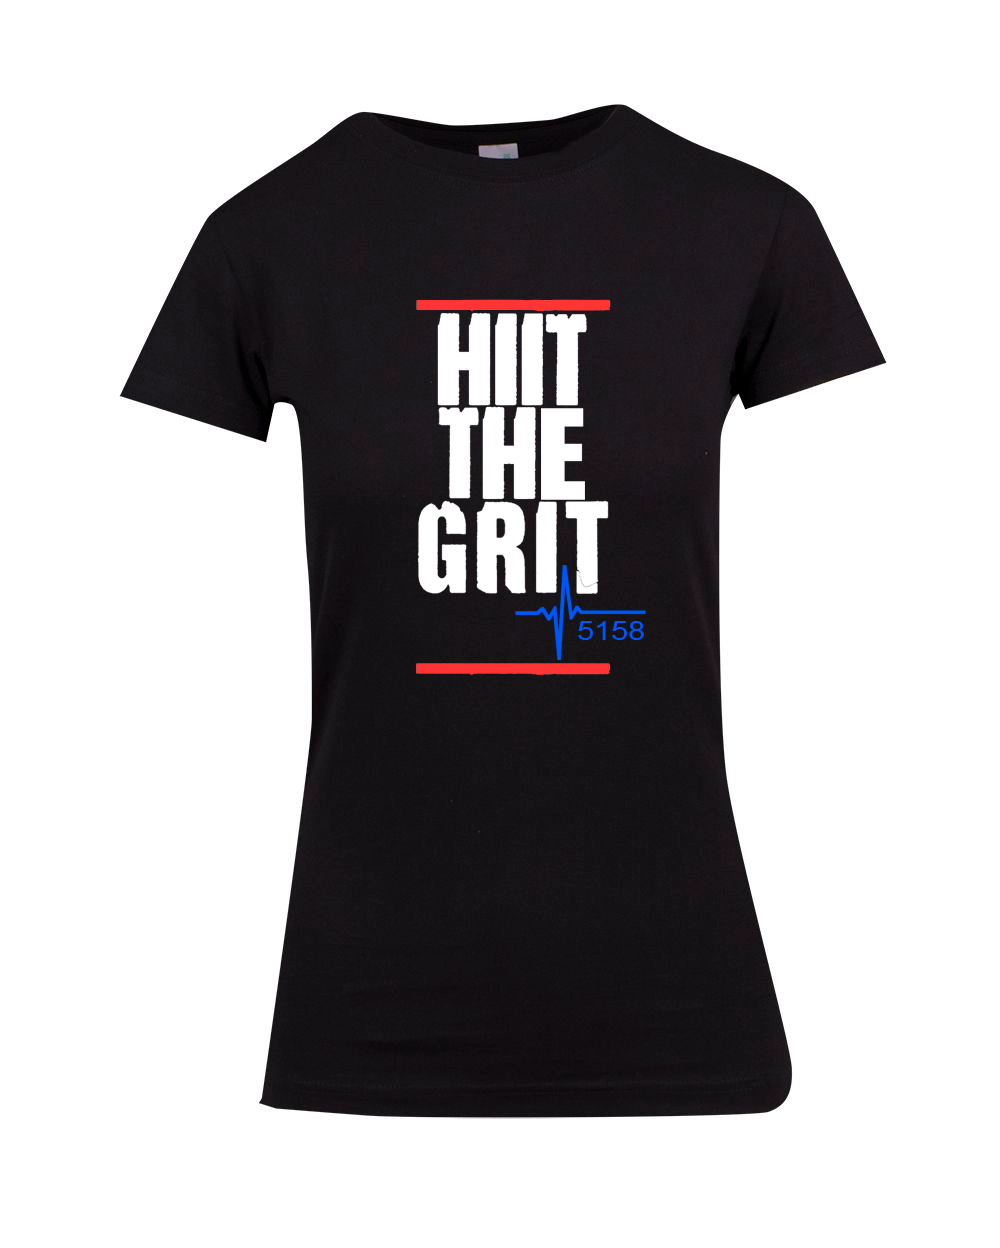 HIIT THE GRIT WOMENS FITTED TEE